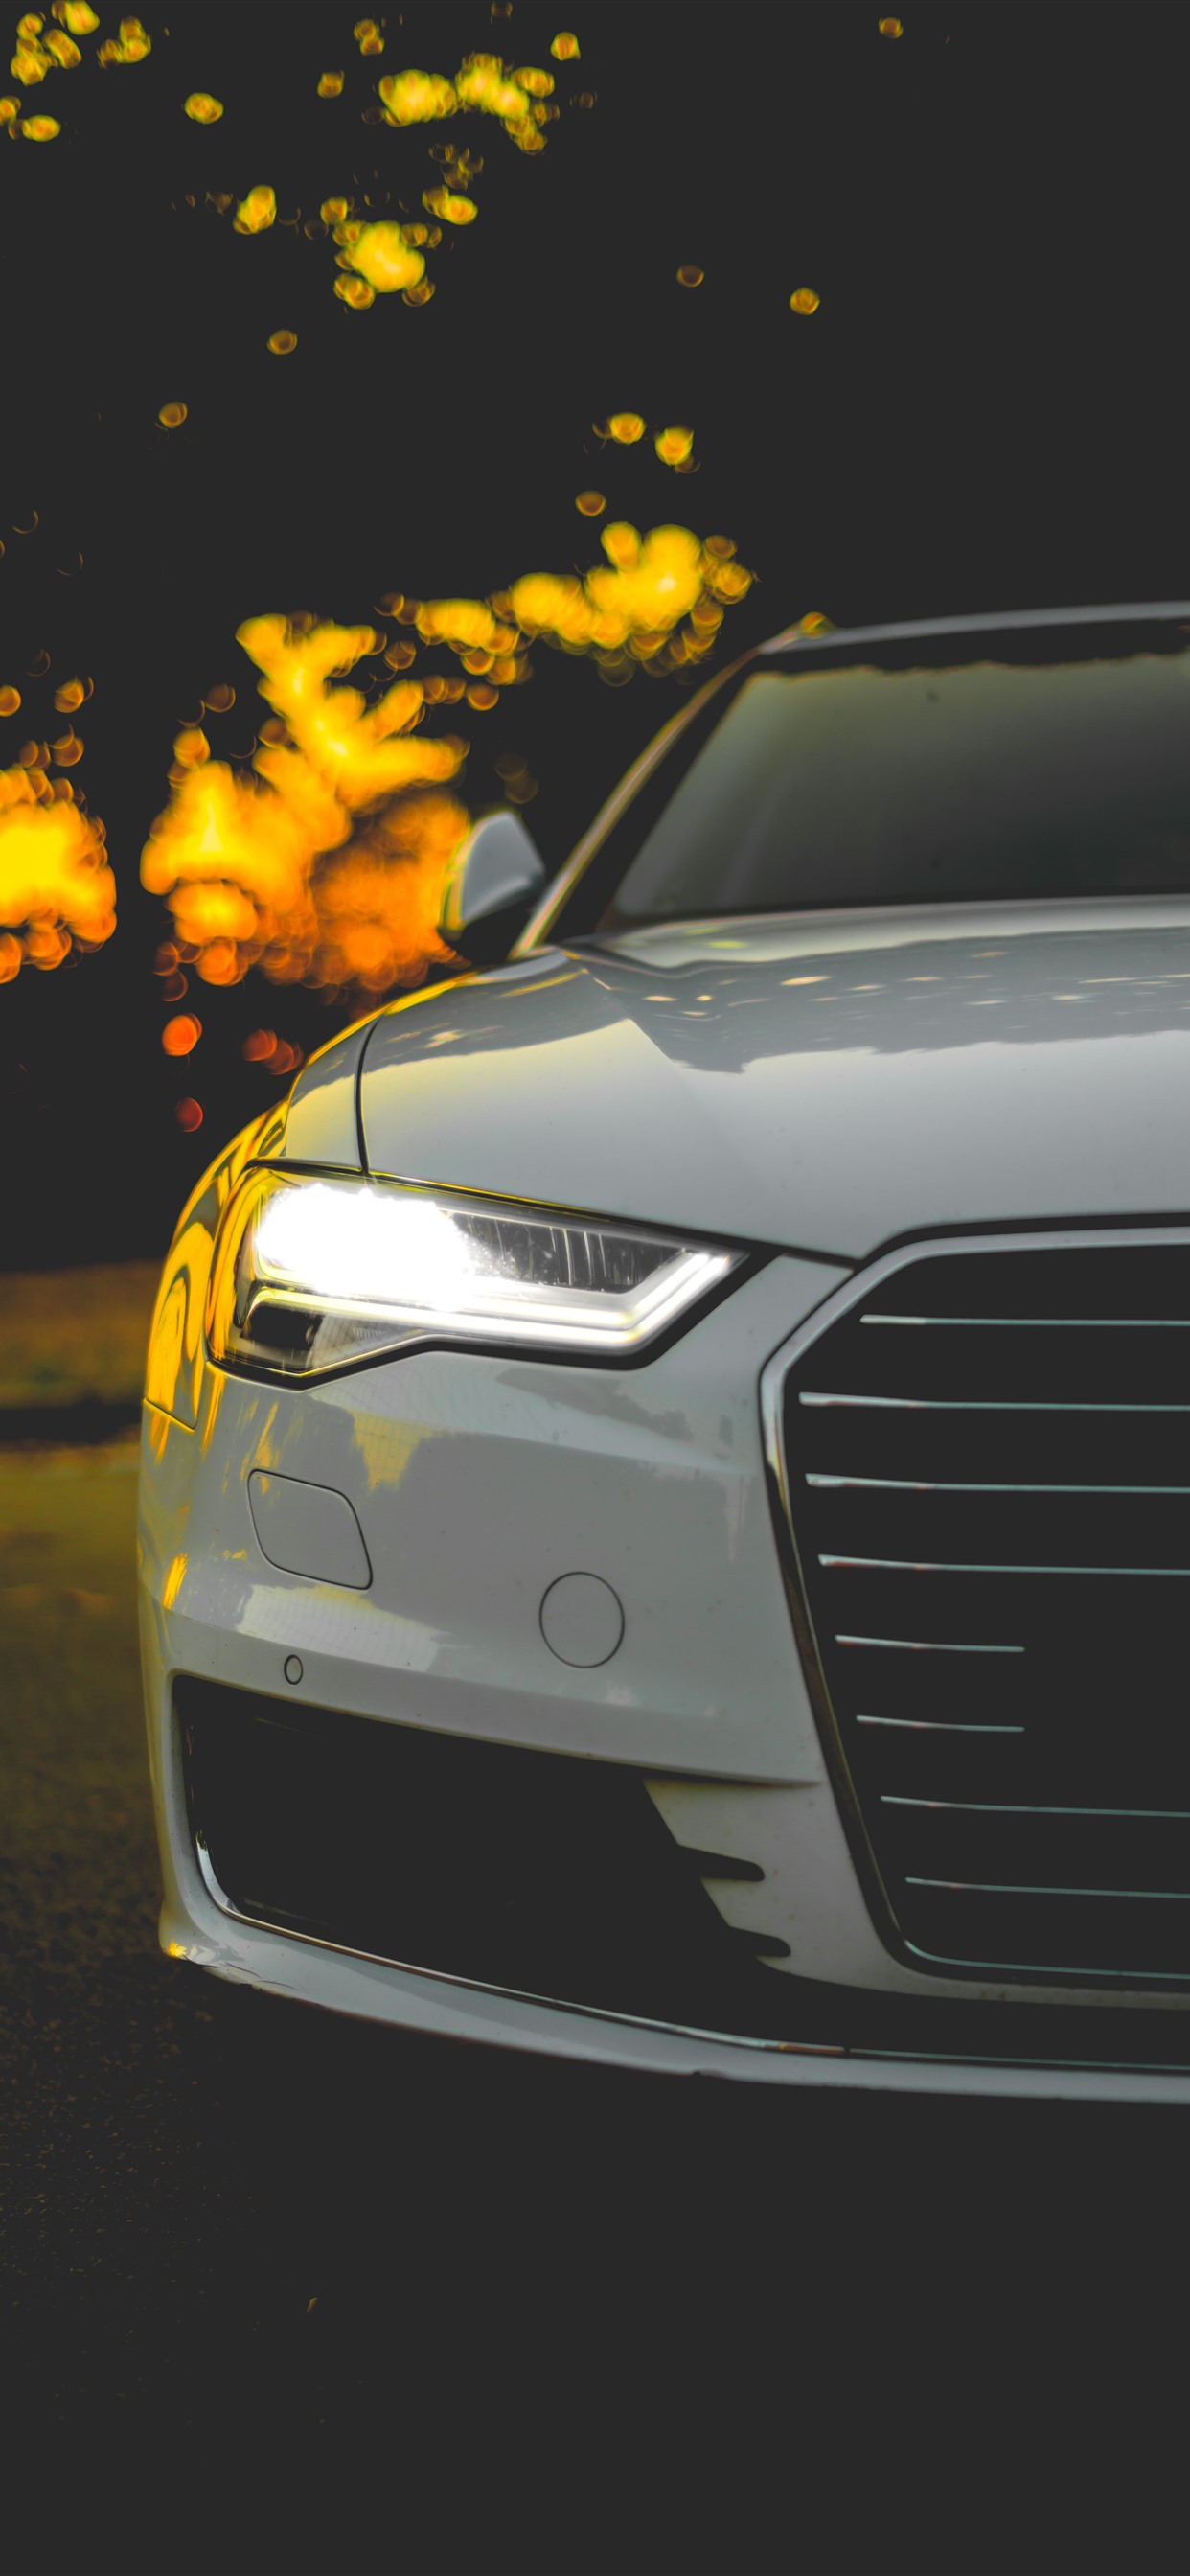 Iphone Wallpaper Audi White Car Front View, Headlight - Audi Car Logo Wallpaper Hd - HD Wallpaper 